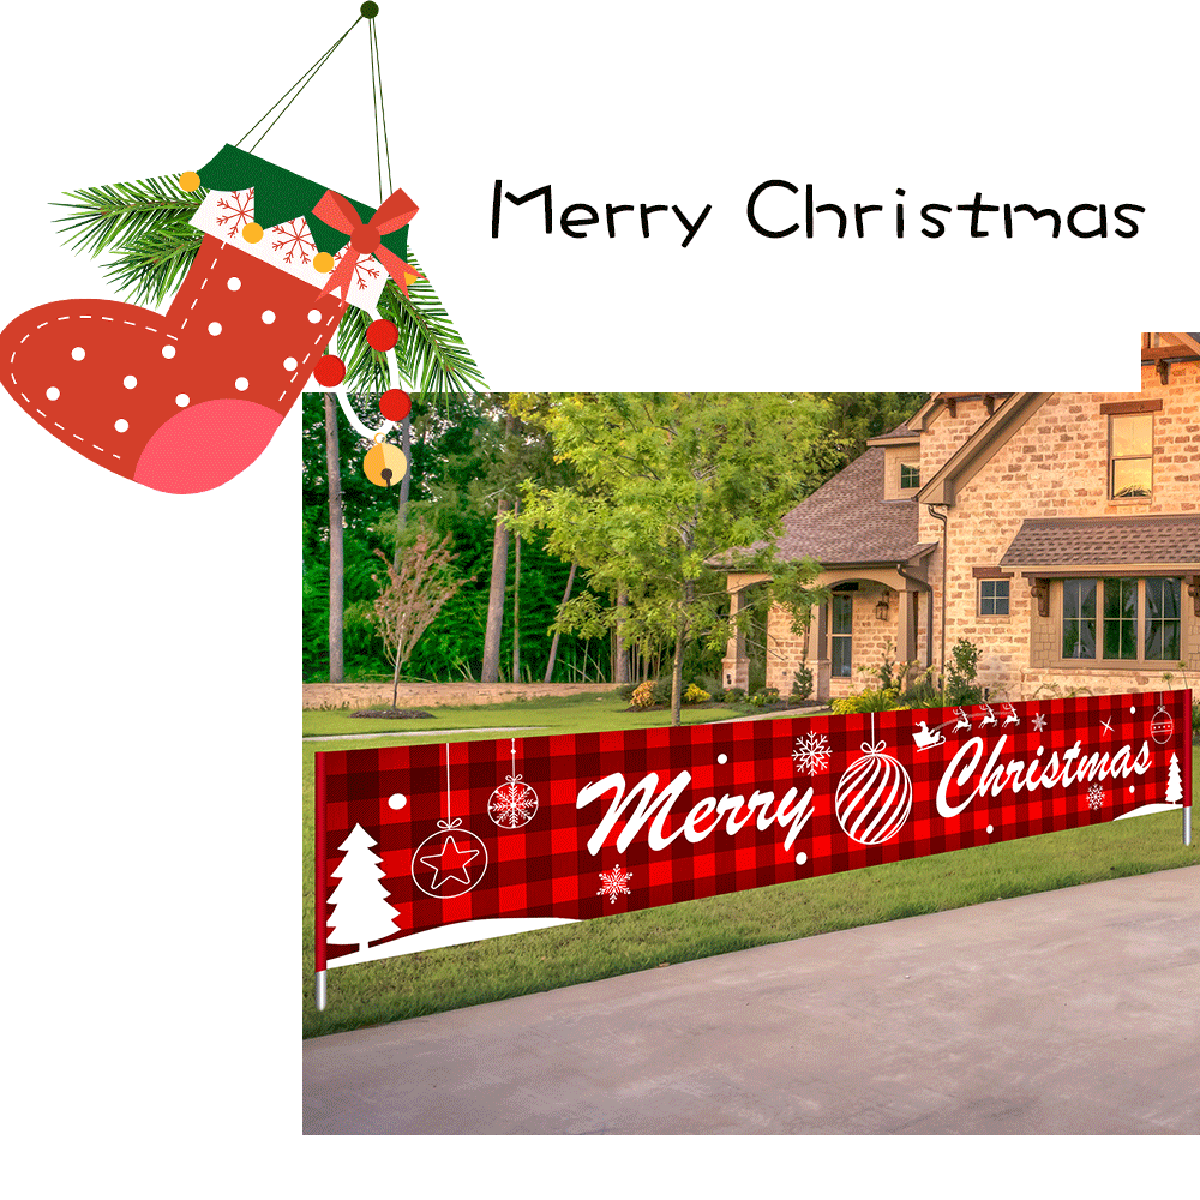 3M-Merry-Christmas-Outdoor-Banner-Oxford-Large-Hanging-Bunting-Xmas-Door-Wall-Decoration-Photography-1764541